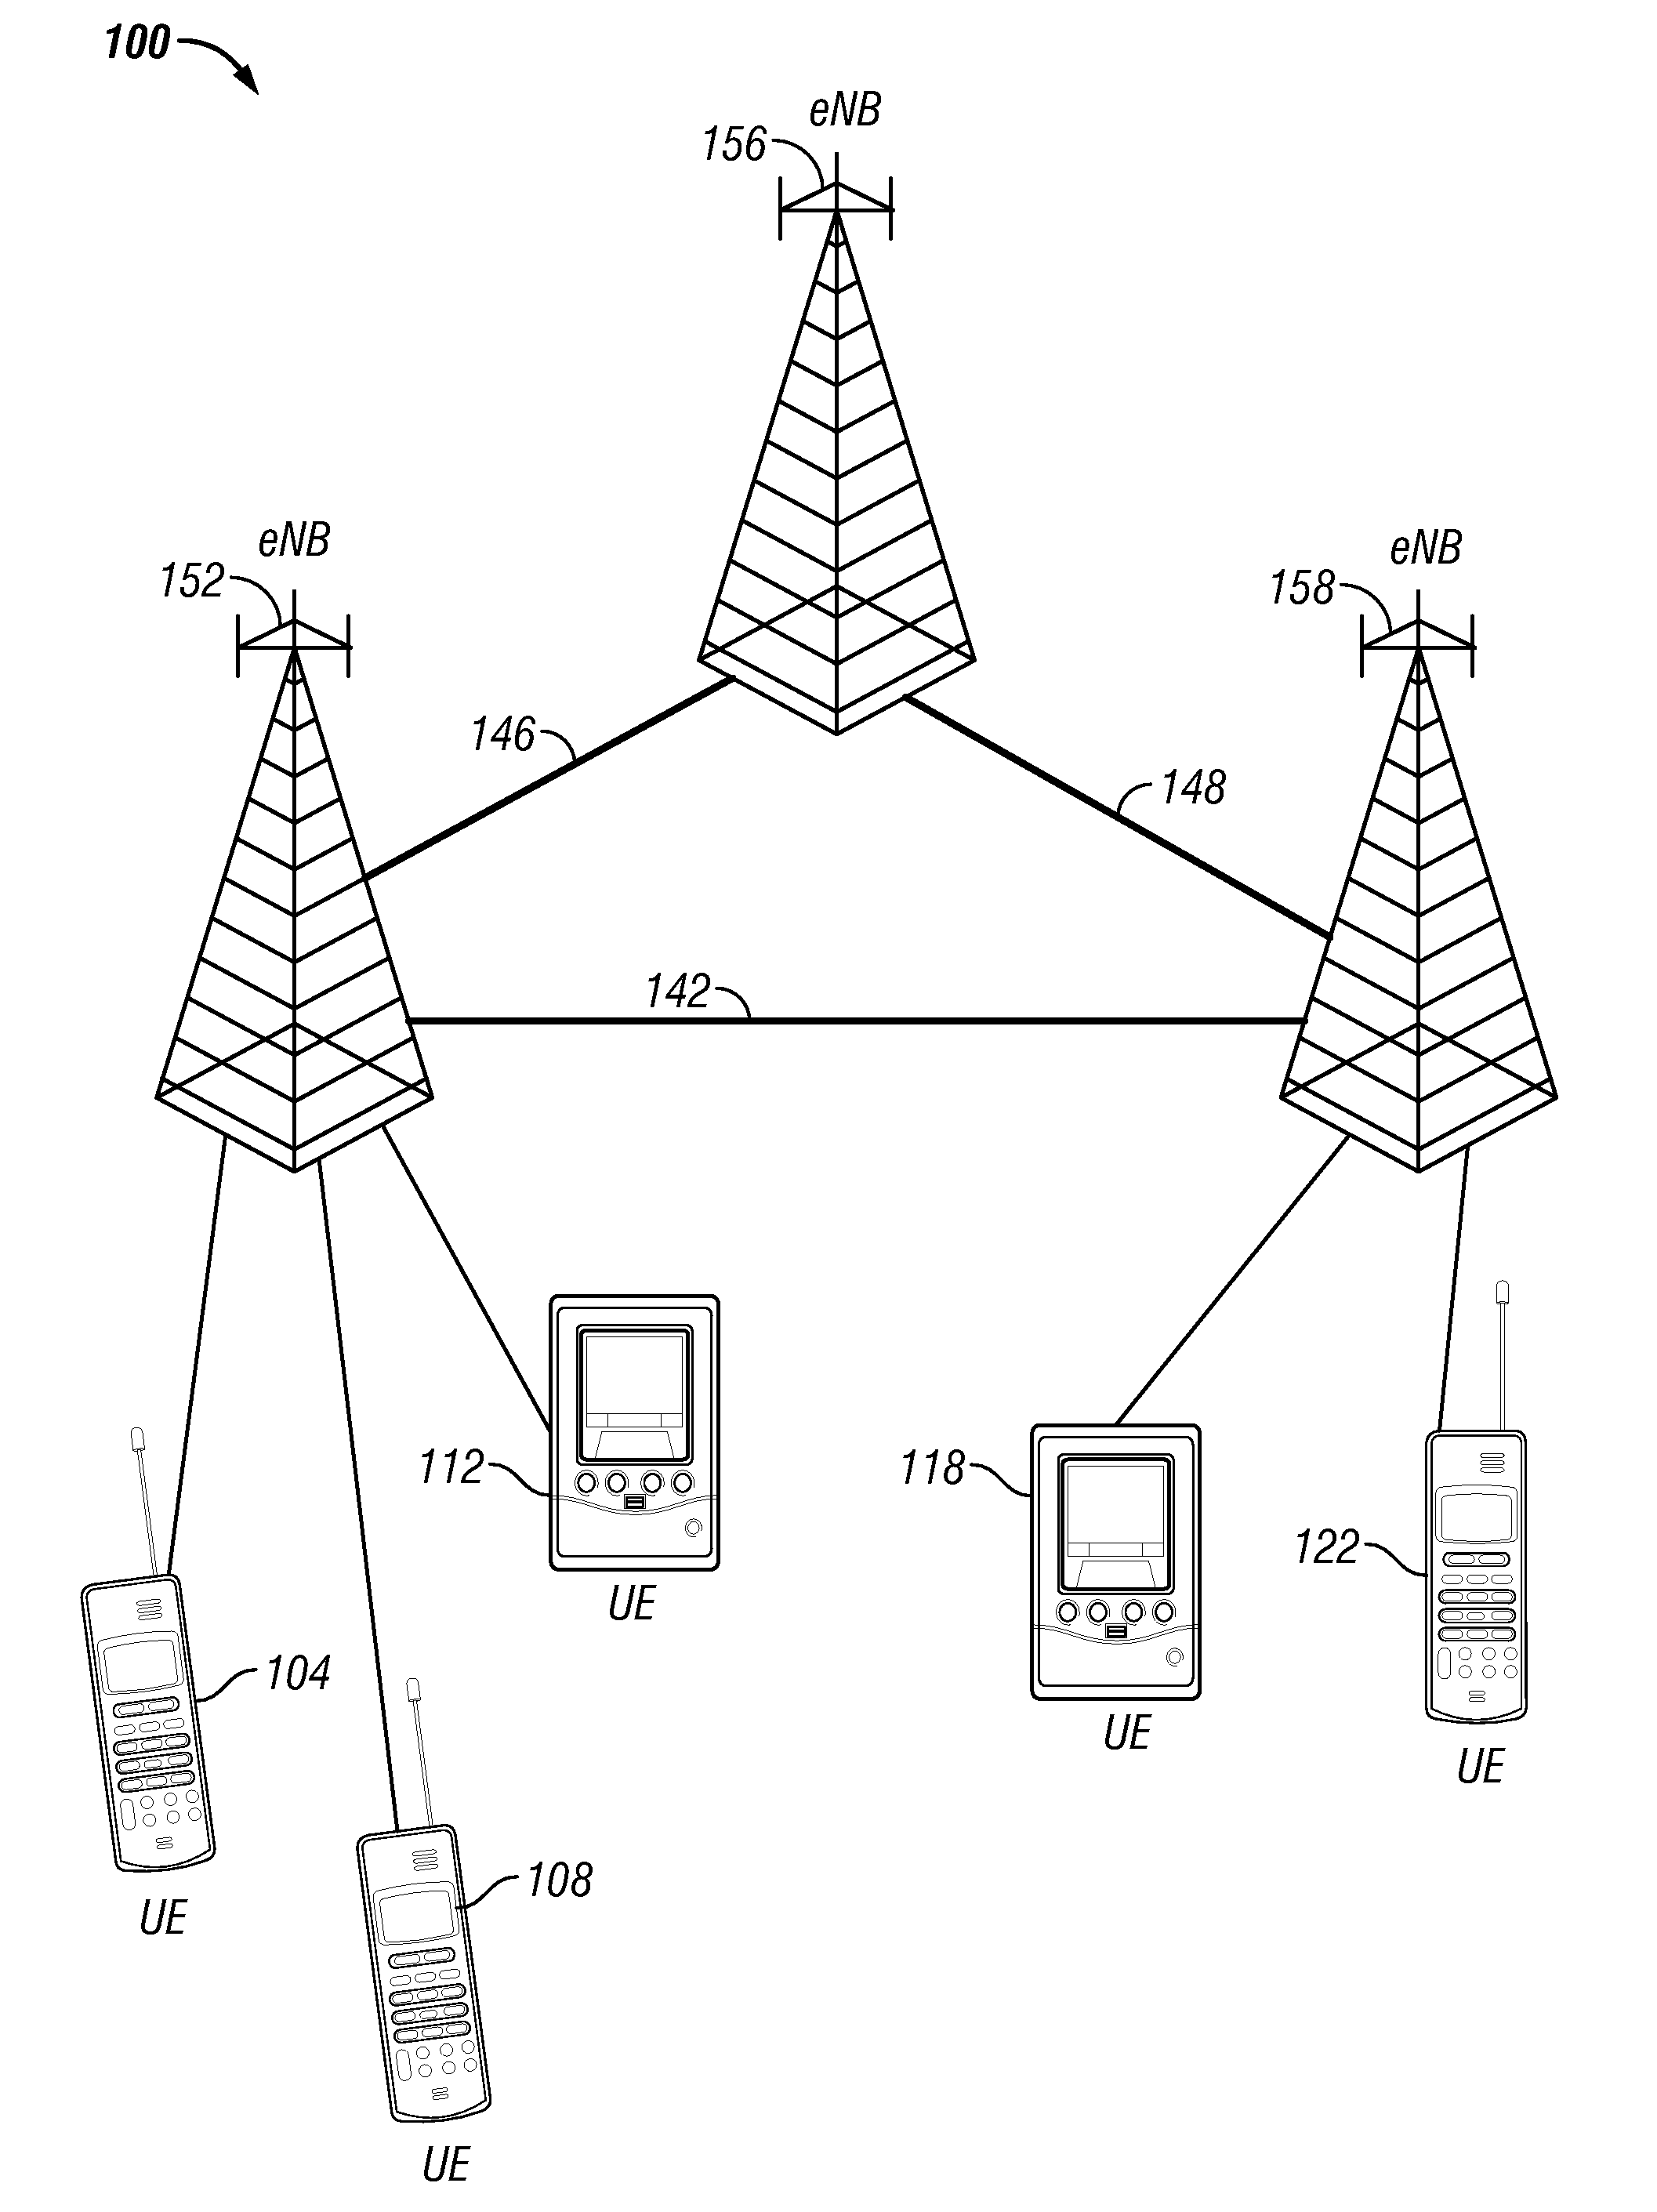 METHOD AND SYSTEM FOR TRANSMISSION OF CHANNEL QUALITY INDICATORS (CQIs) BY MOBILE DEVICES IN A WIRELESS COMMUNICATIONS NETWORK